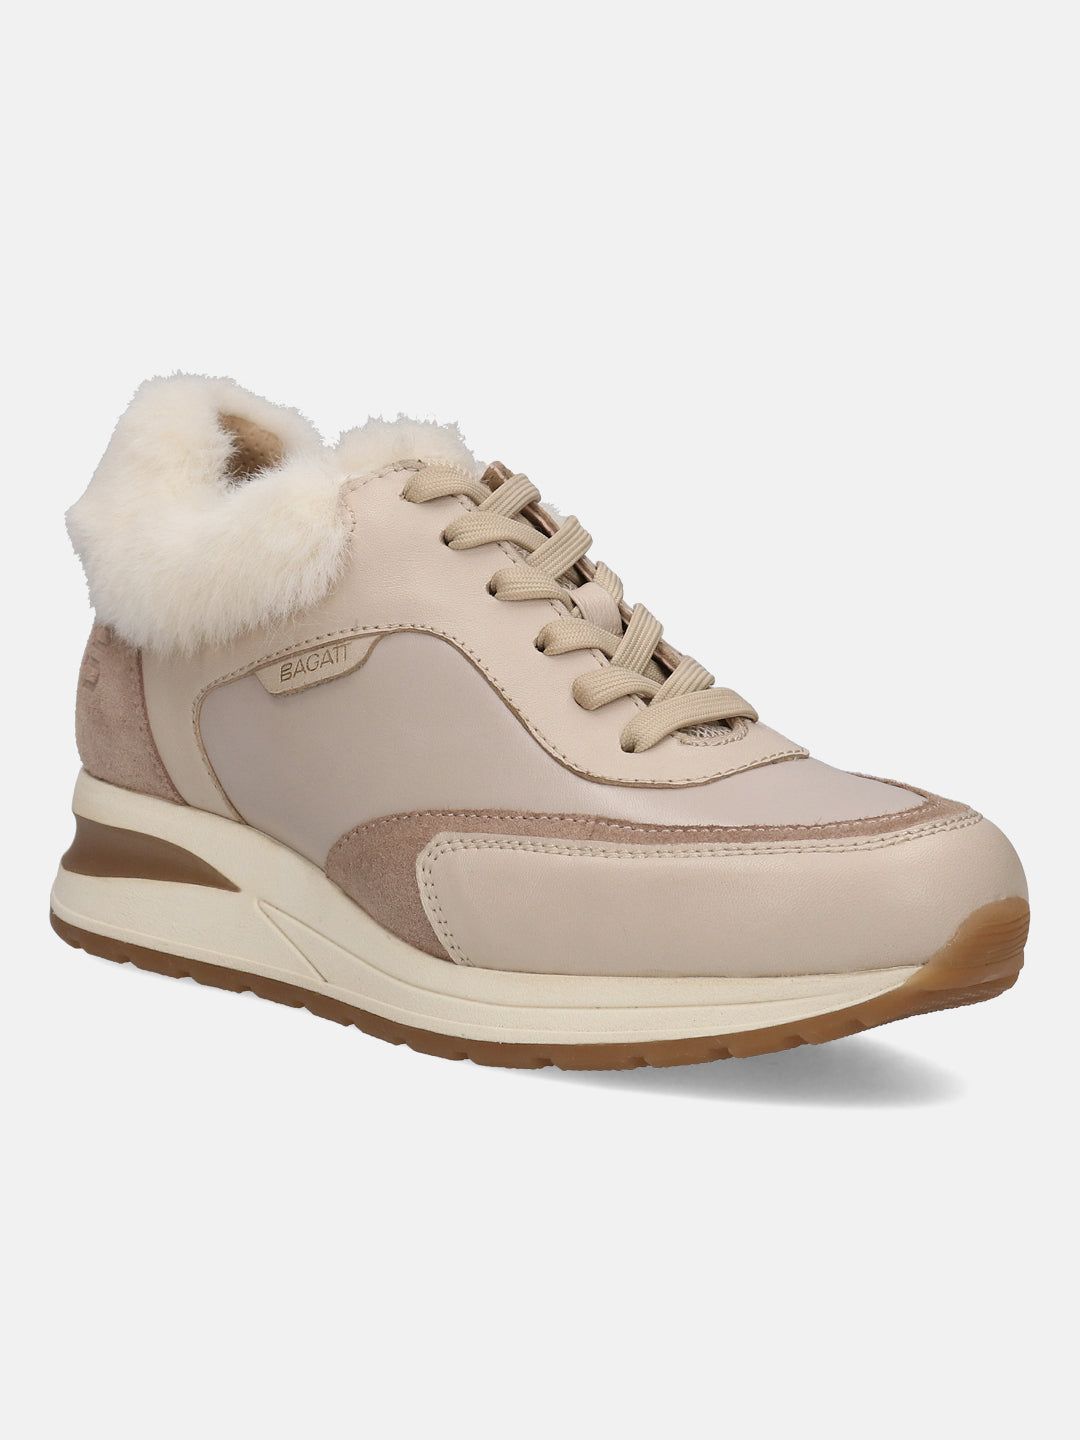 Venice Beige & Taupe Leather Sneakers